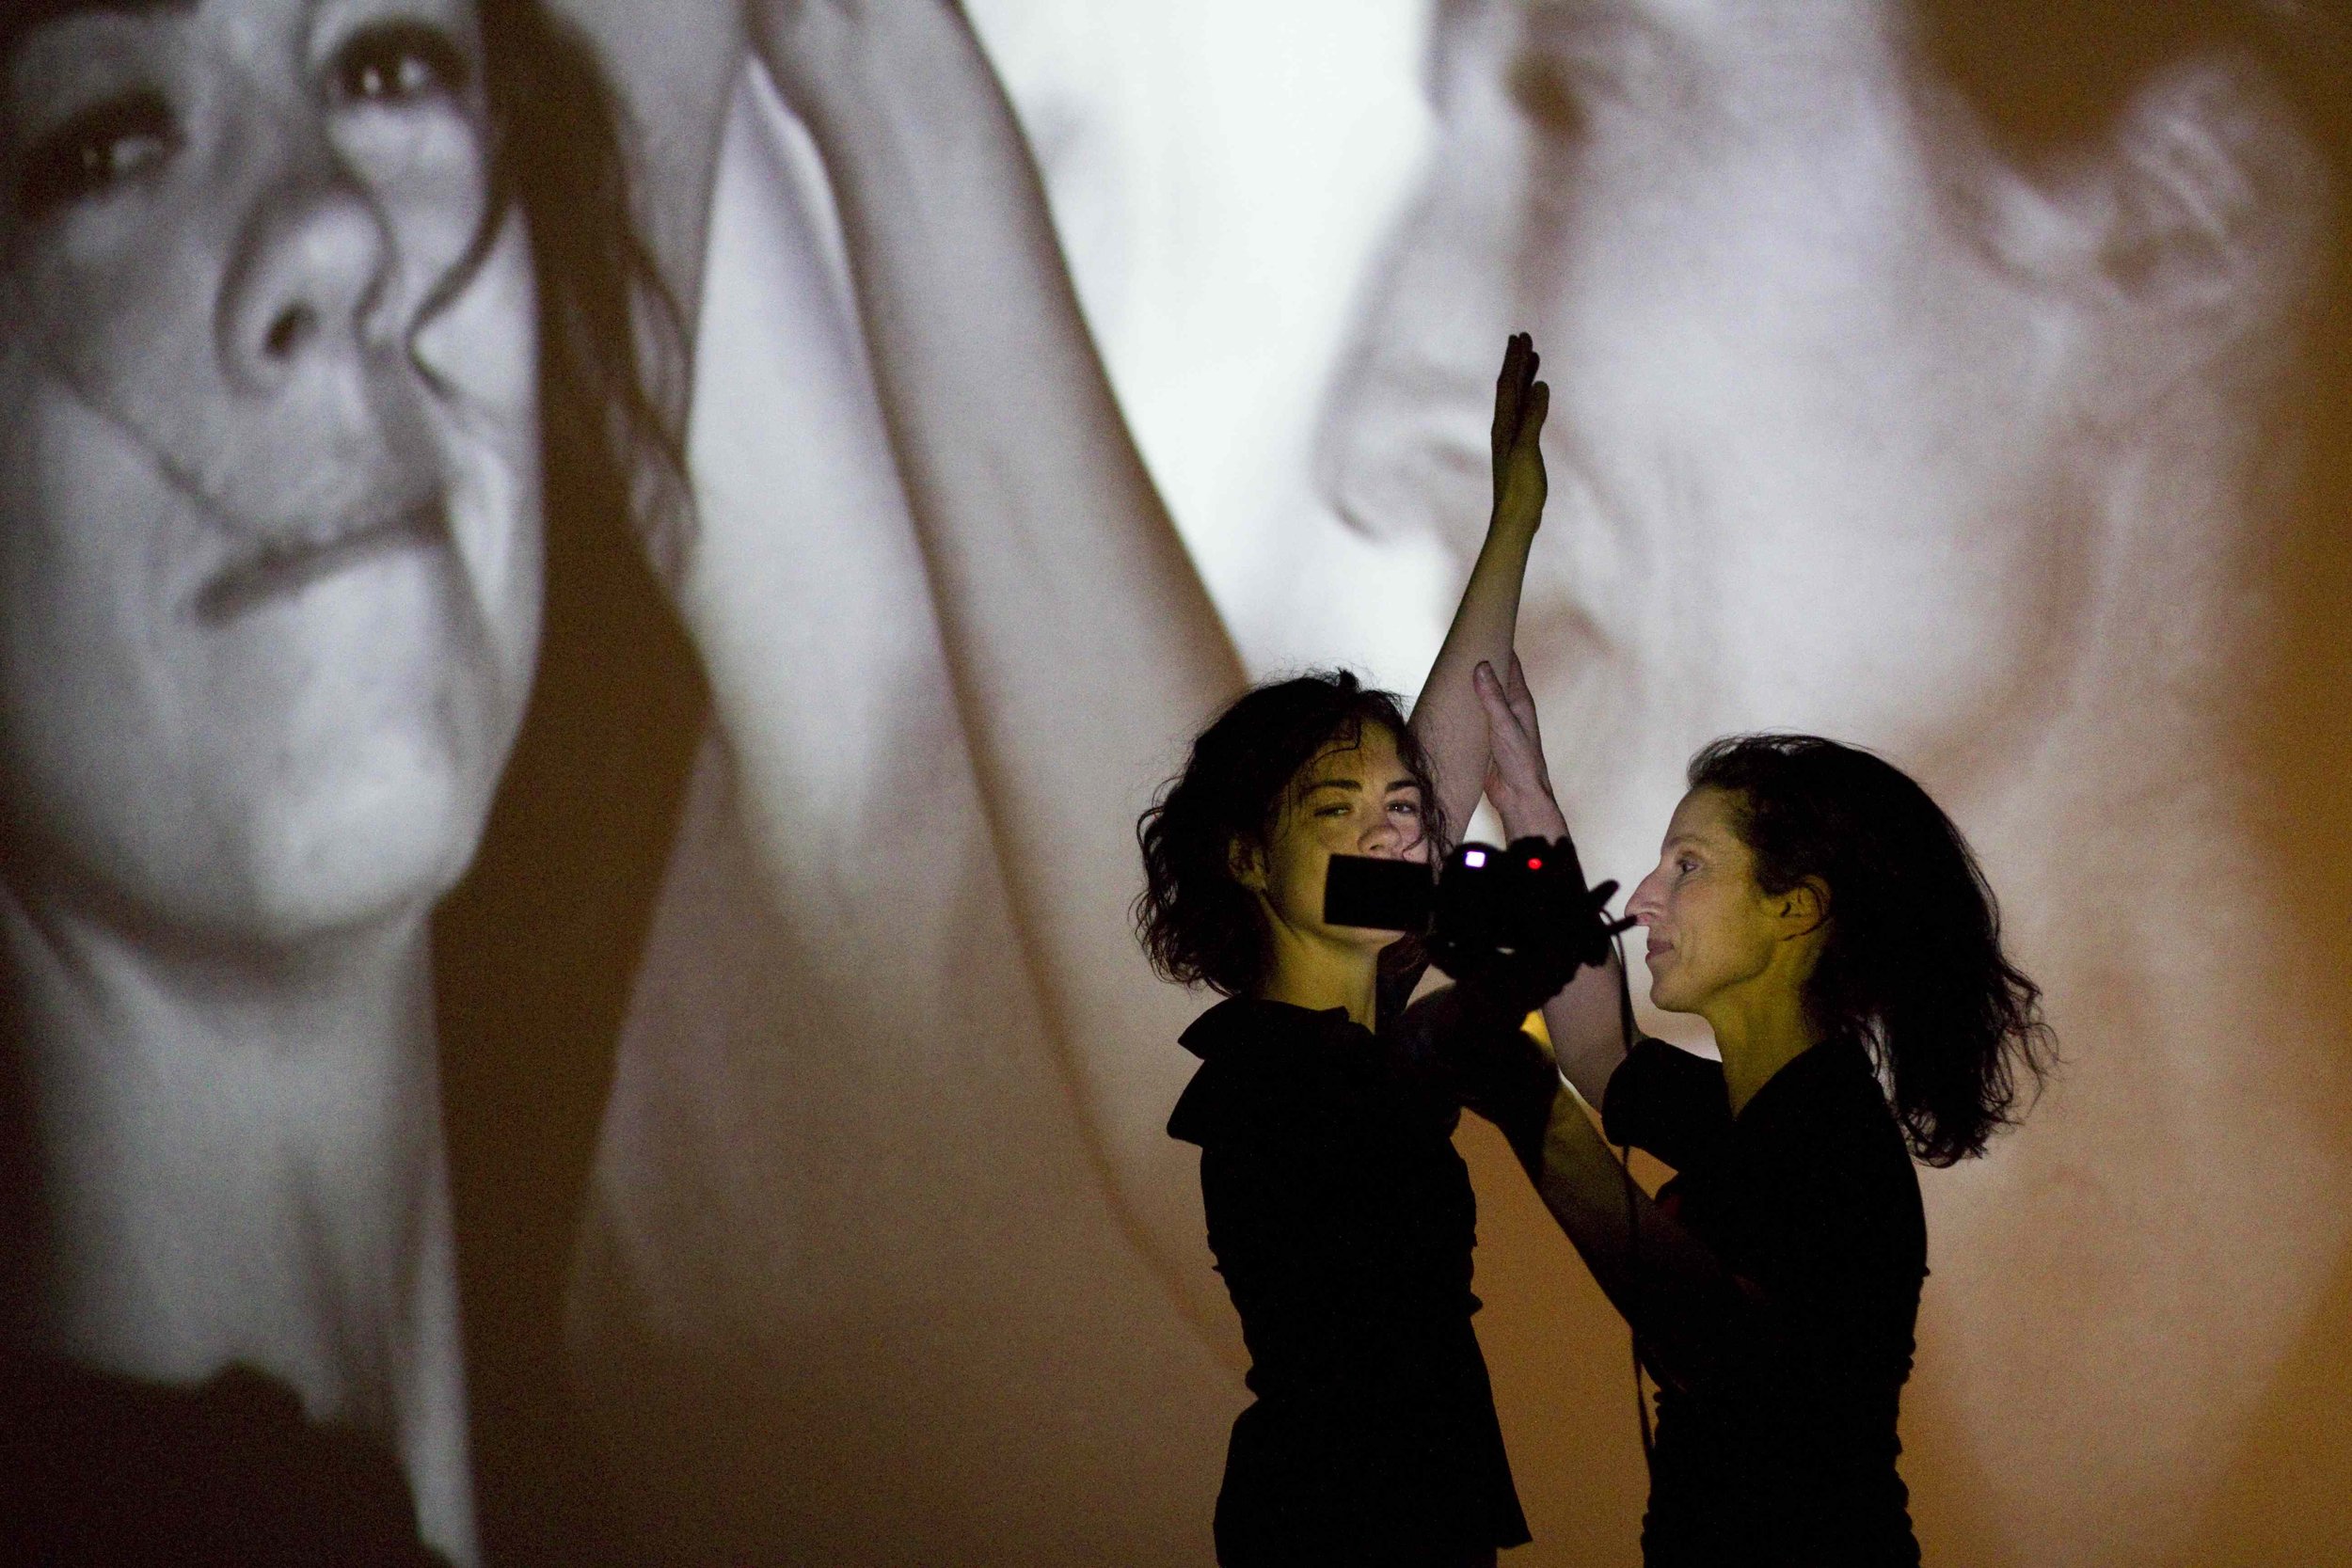 Two dancers film themselves with a video camera; their images are projected on a screen behind them.